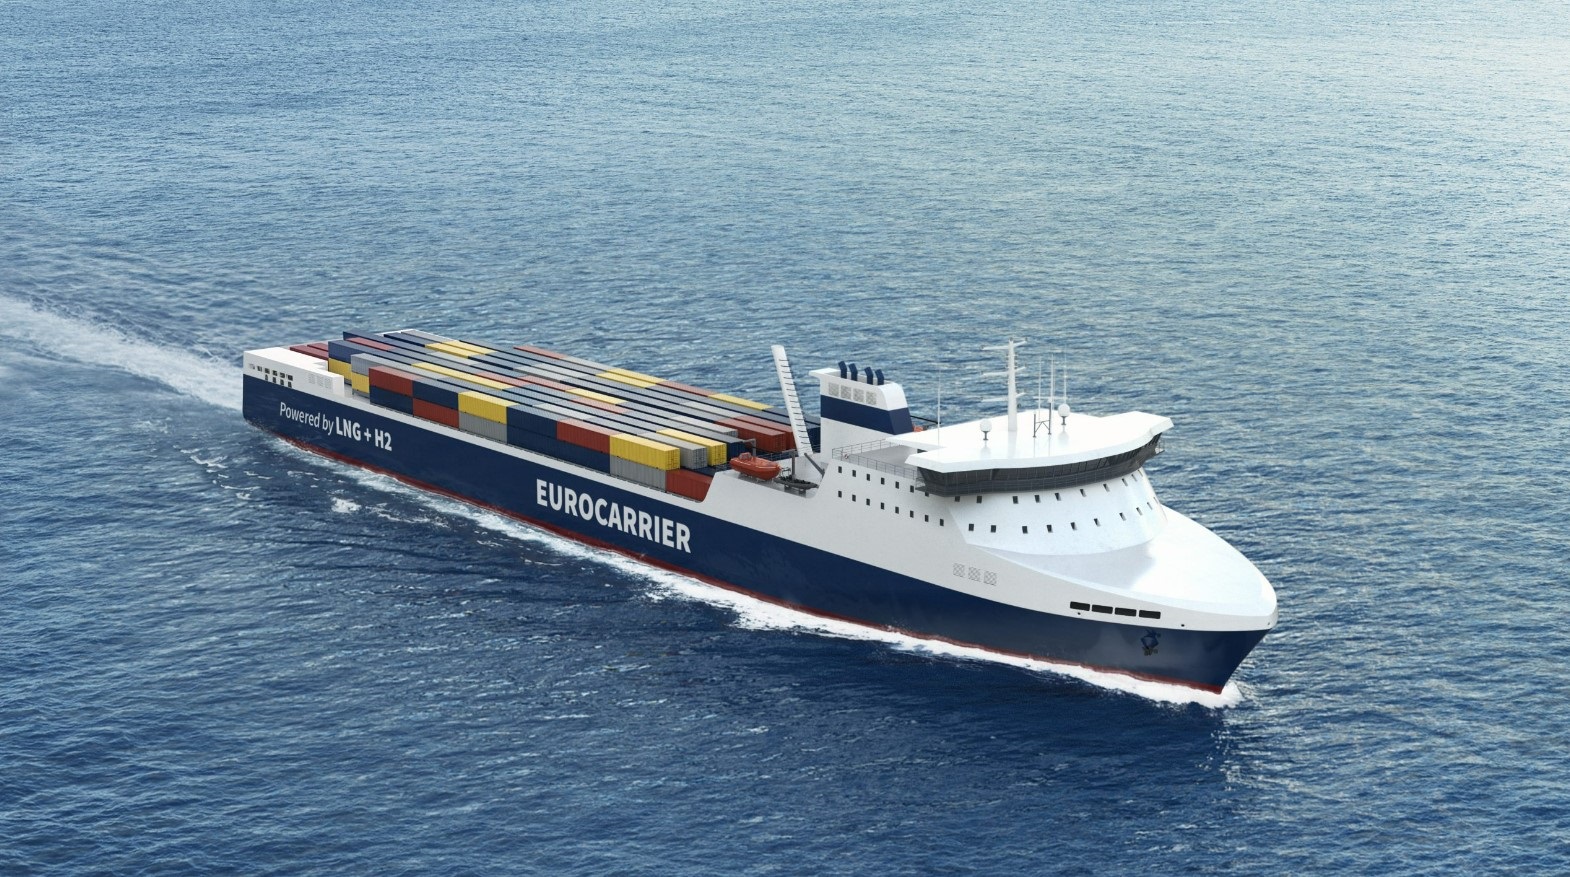 Deltamarin, Fennorail team up to work on ferry powered by LNG and green hydrogen